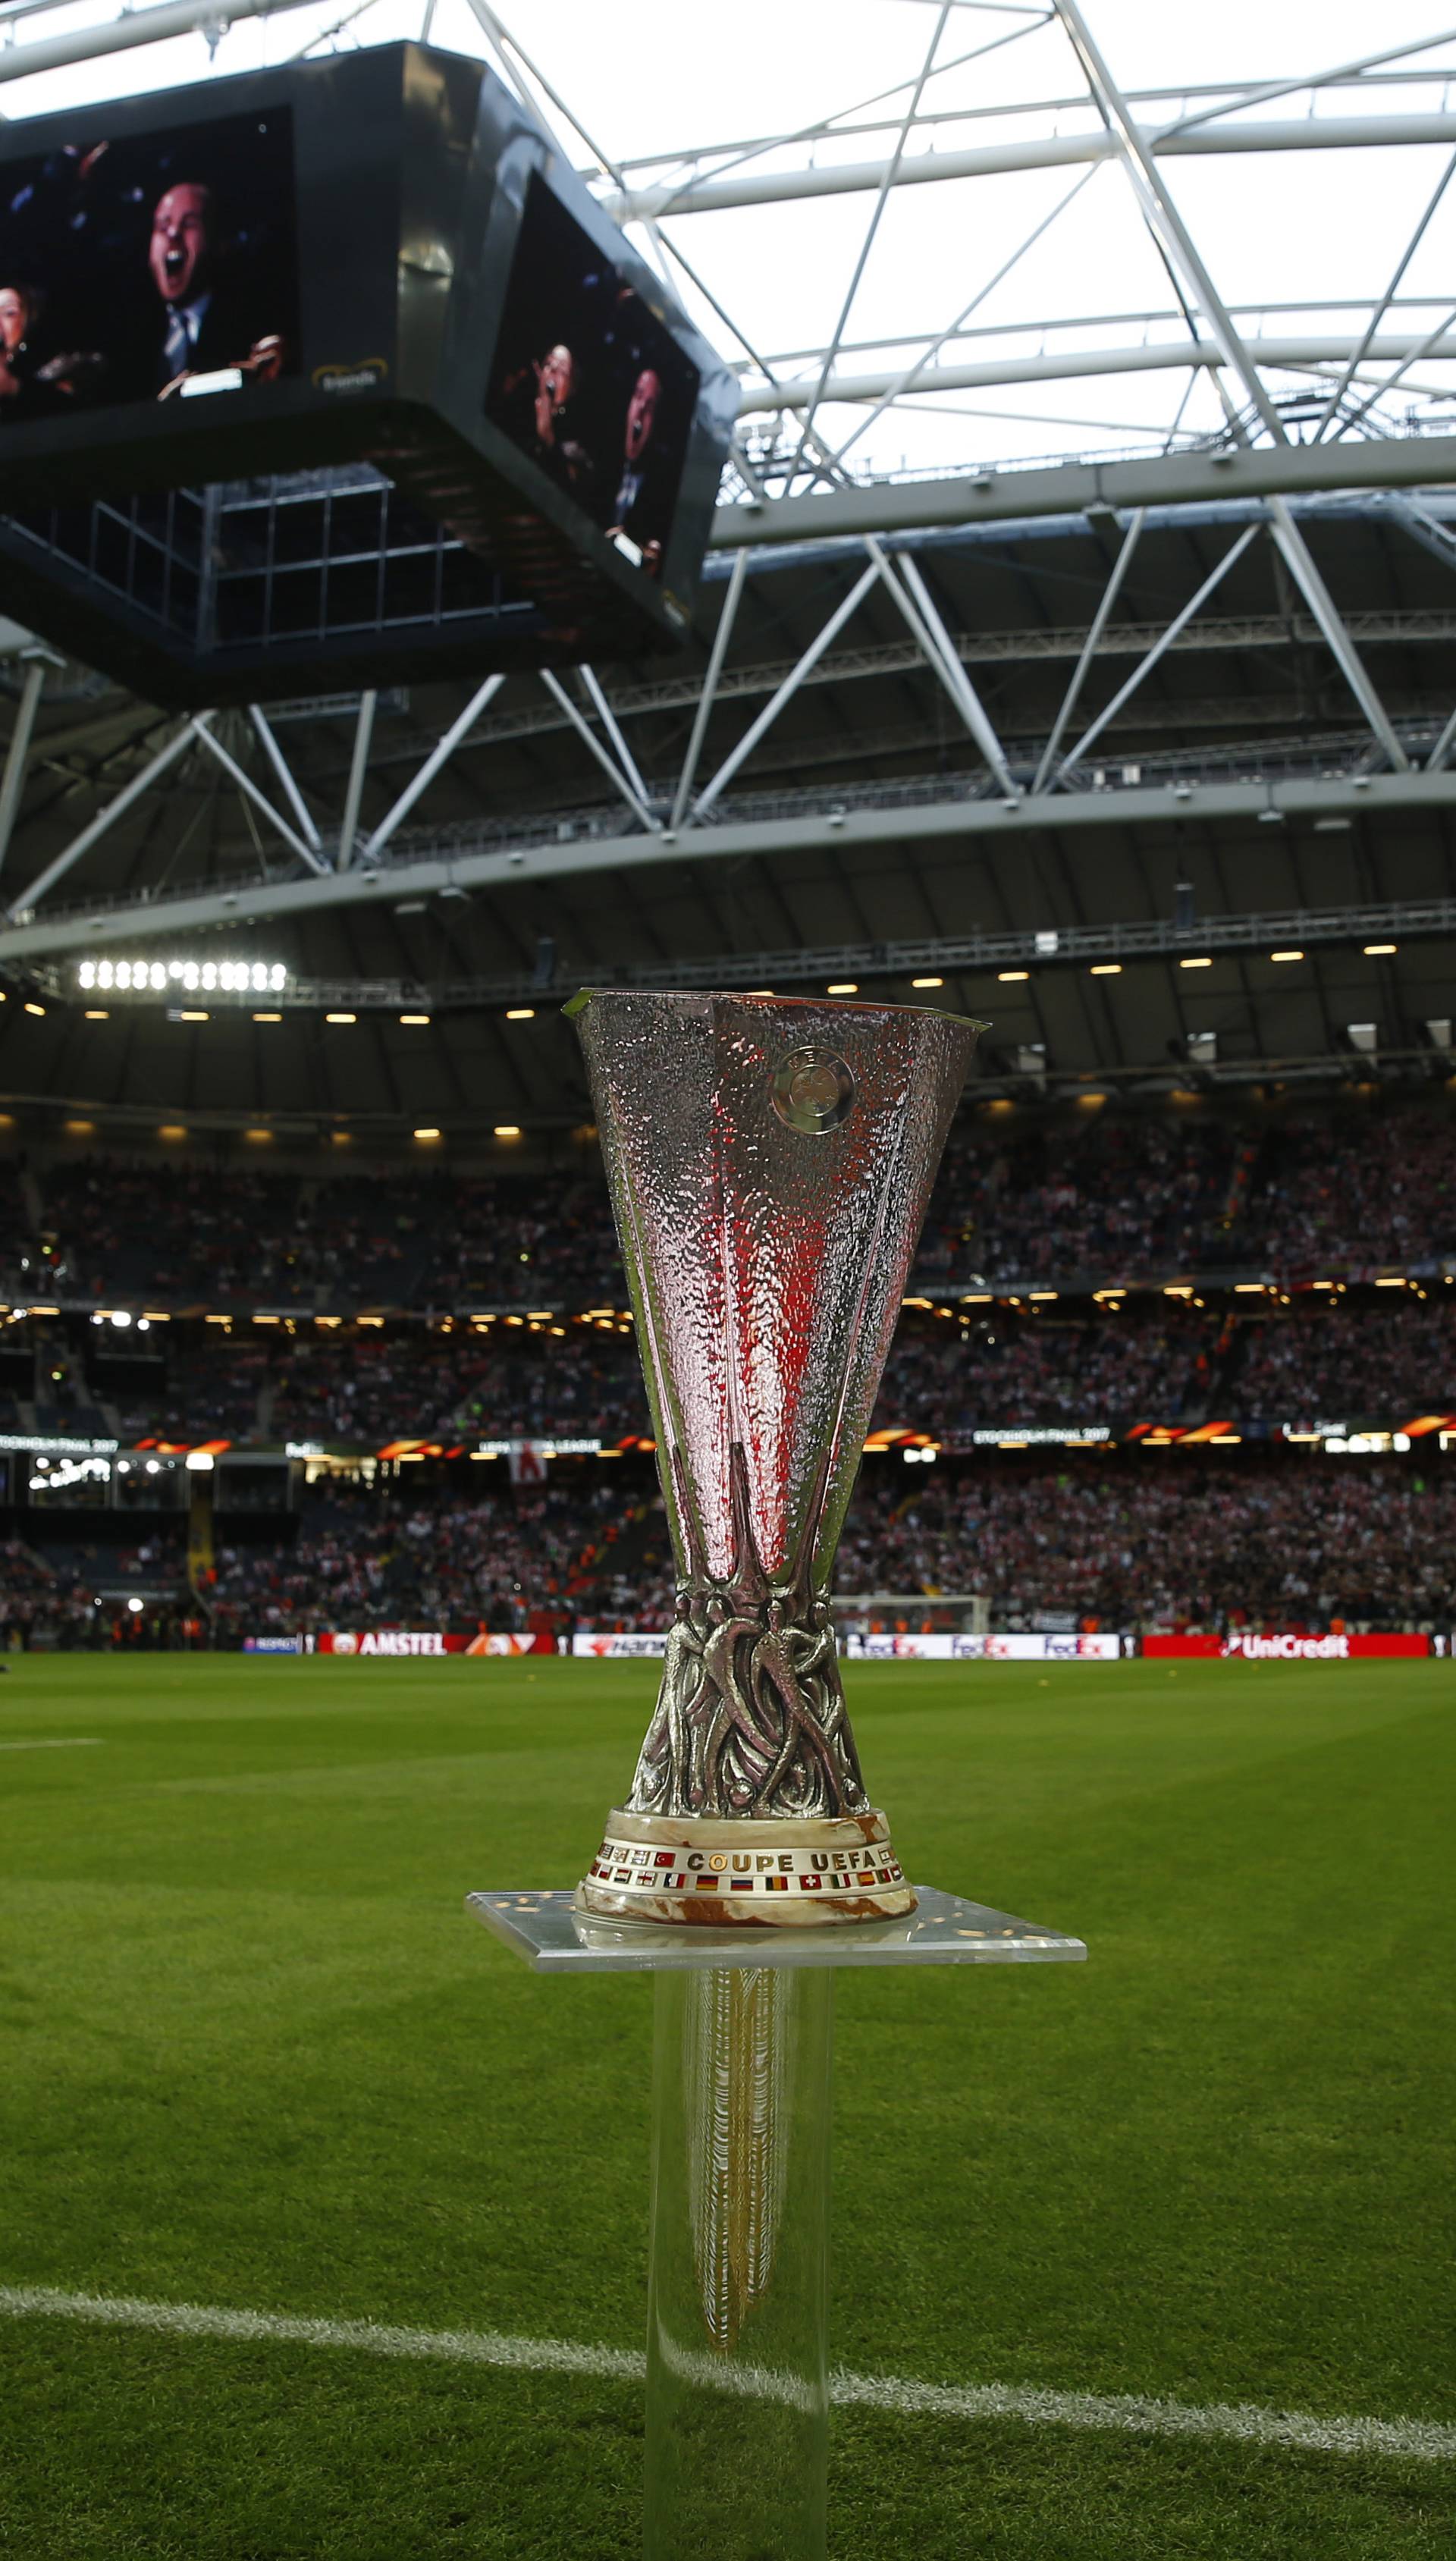 Europa League trophy pitchside before the match